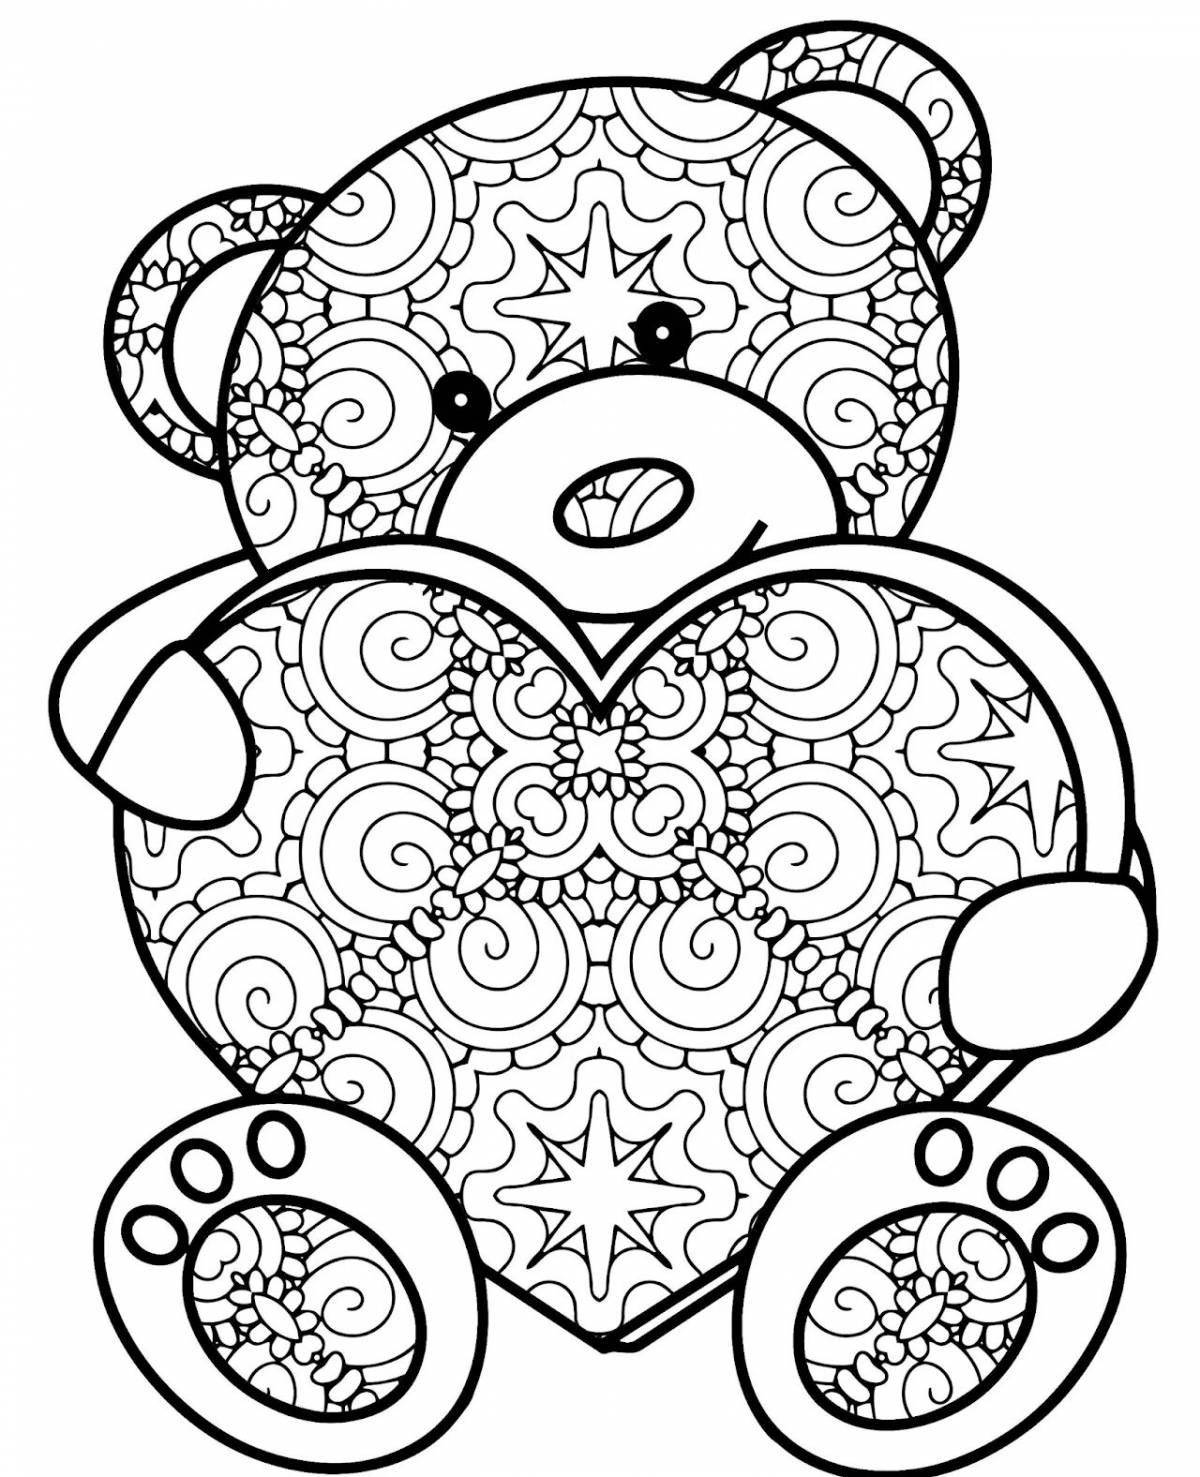 Adorable anti-stress coloring book for kids